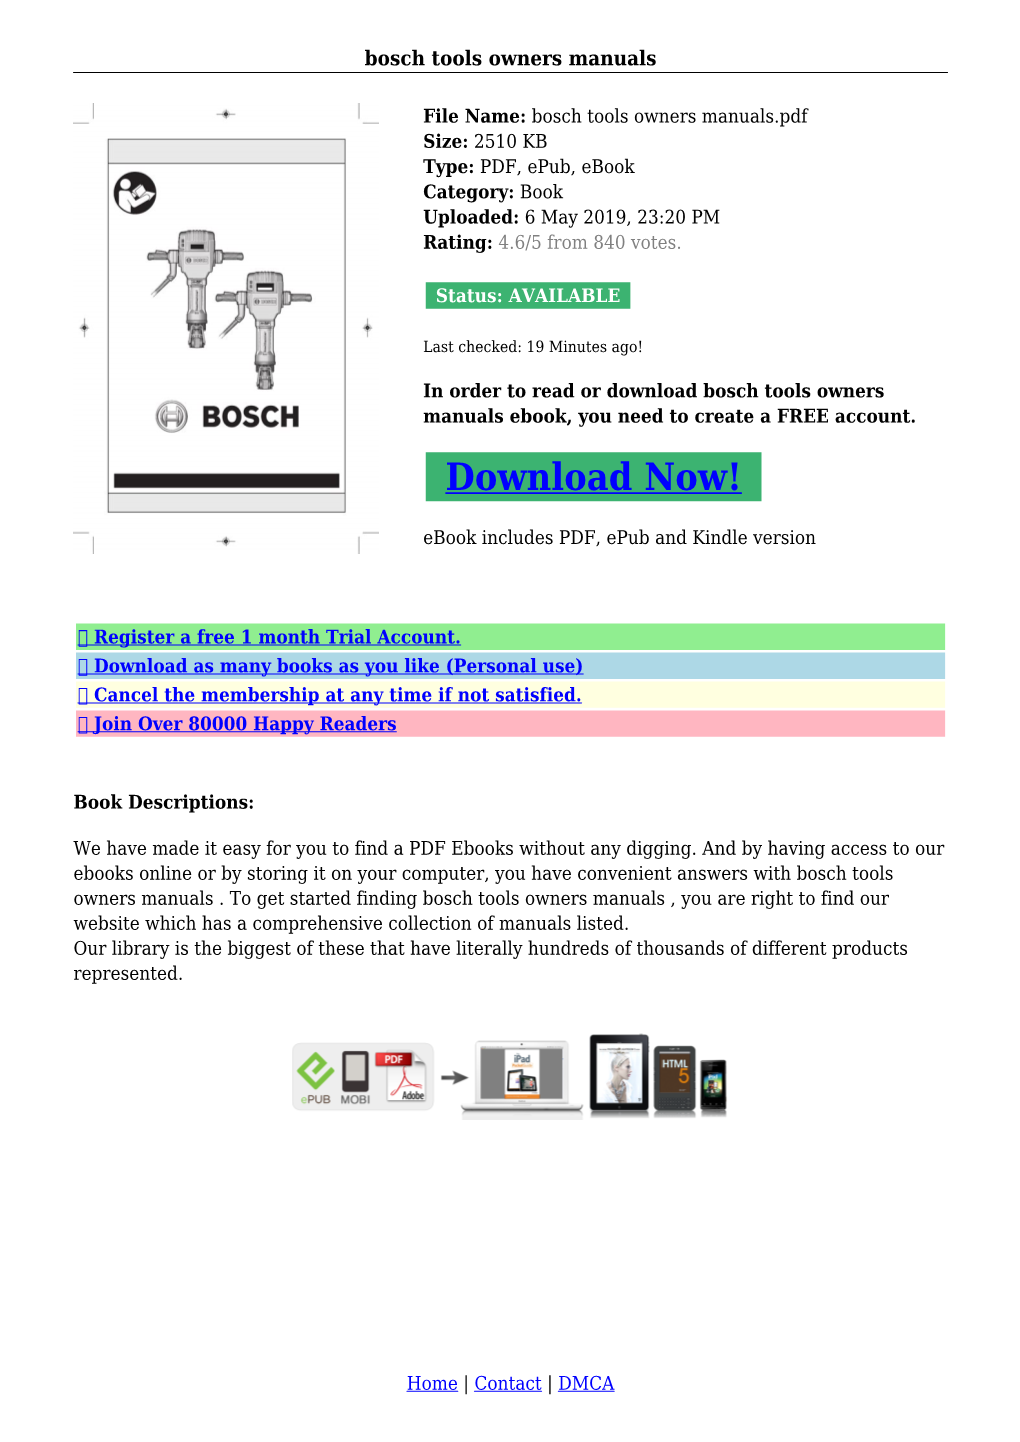 Bosch Tools Owners Manuals